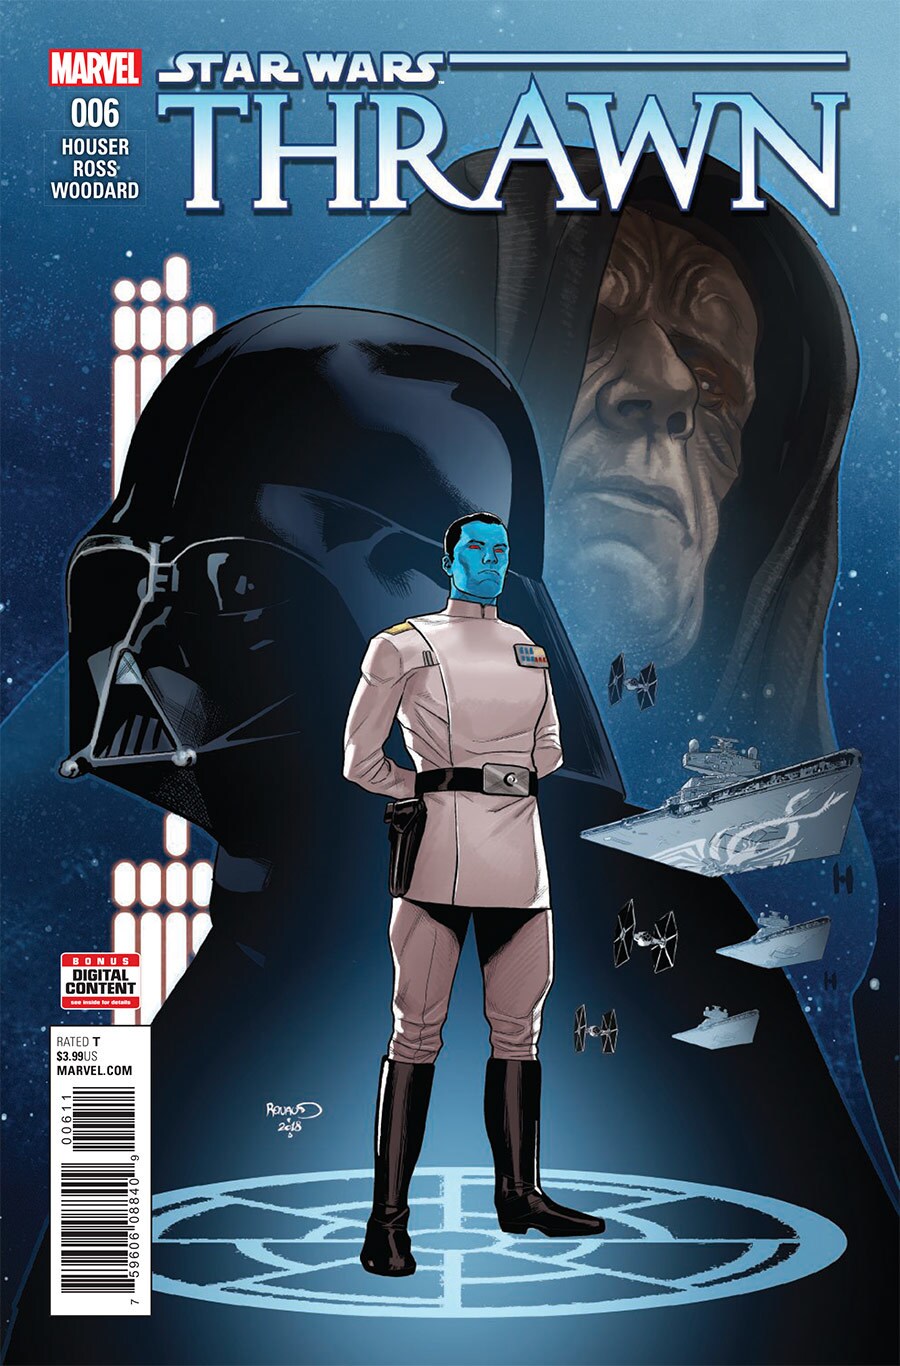 Cover art for the Thrawn comic, issue #6. It features Thrawn, Darth Vader, and Emperor Palpatine.